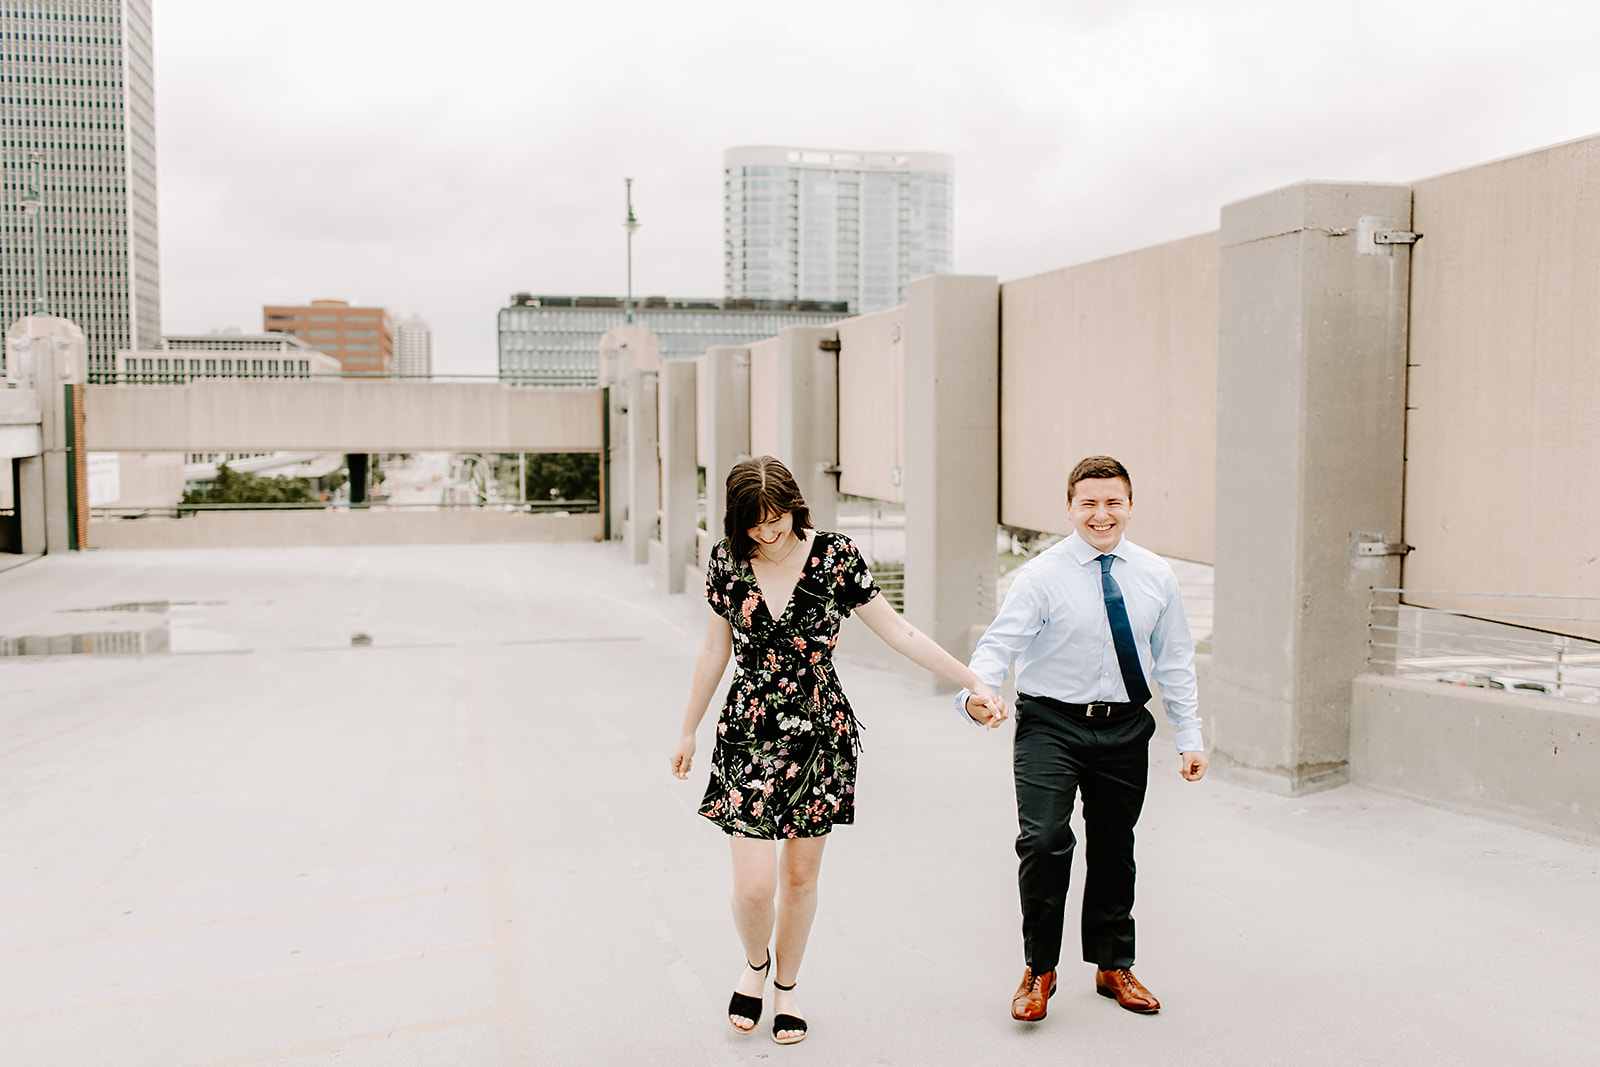   Click to browse the blog of this Downtown Indianapolis Engagement Session with Emily and Davis by Emily Wehner, Indianapolis photographer. Posing inspiration | Couples session location ideas | Urban engagement session #photography #engagementphotog